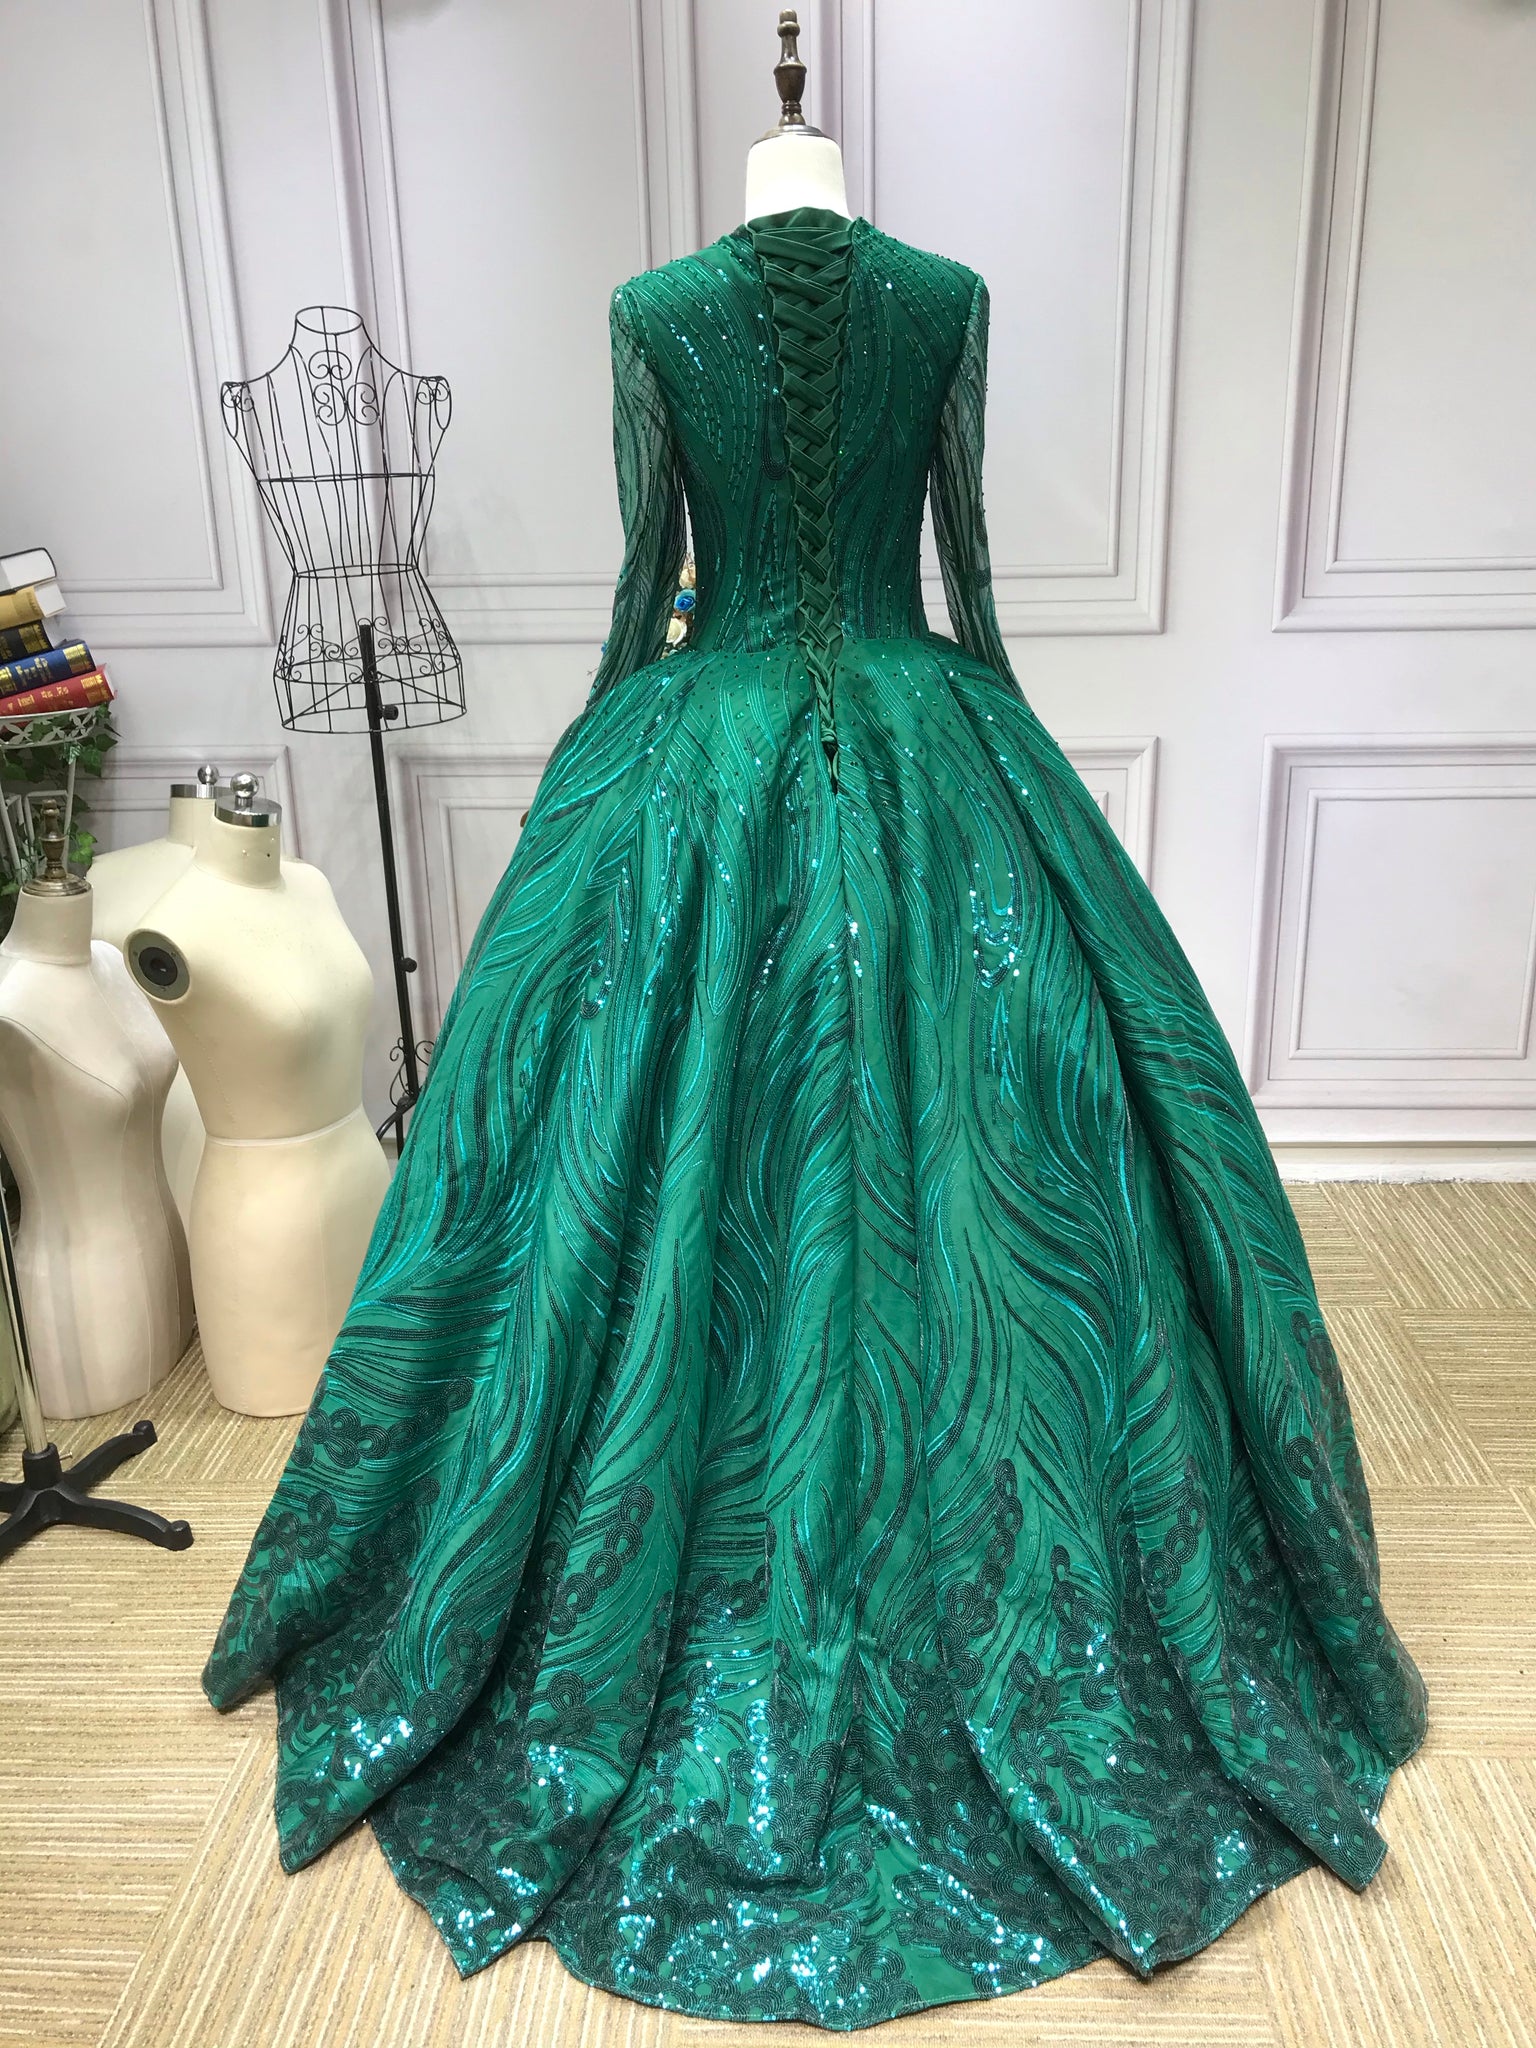 Elegant Emerald Green Evening Dress for Formal Events with a Satin Finish -  China Princess Dress and Fashion Dress price | Made-in-China.com